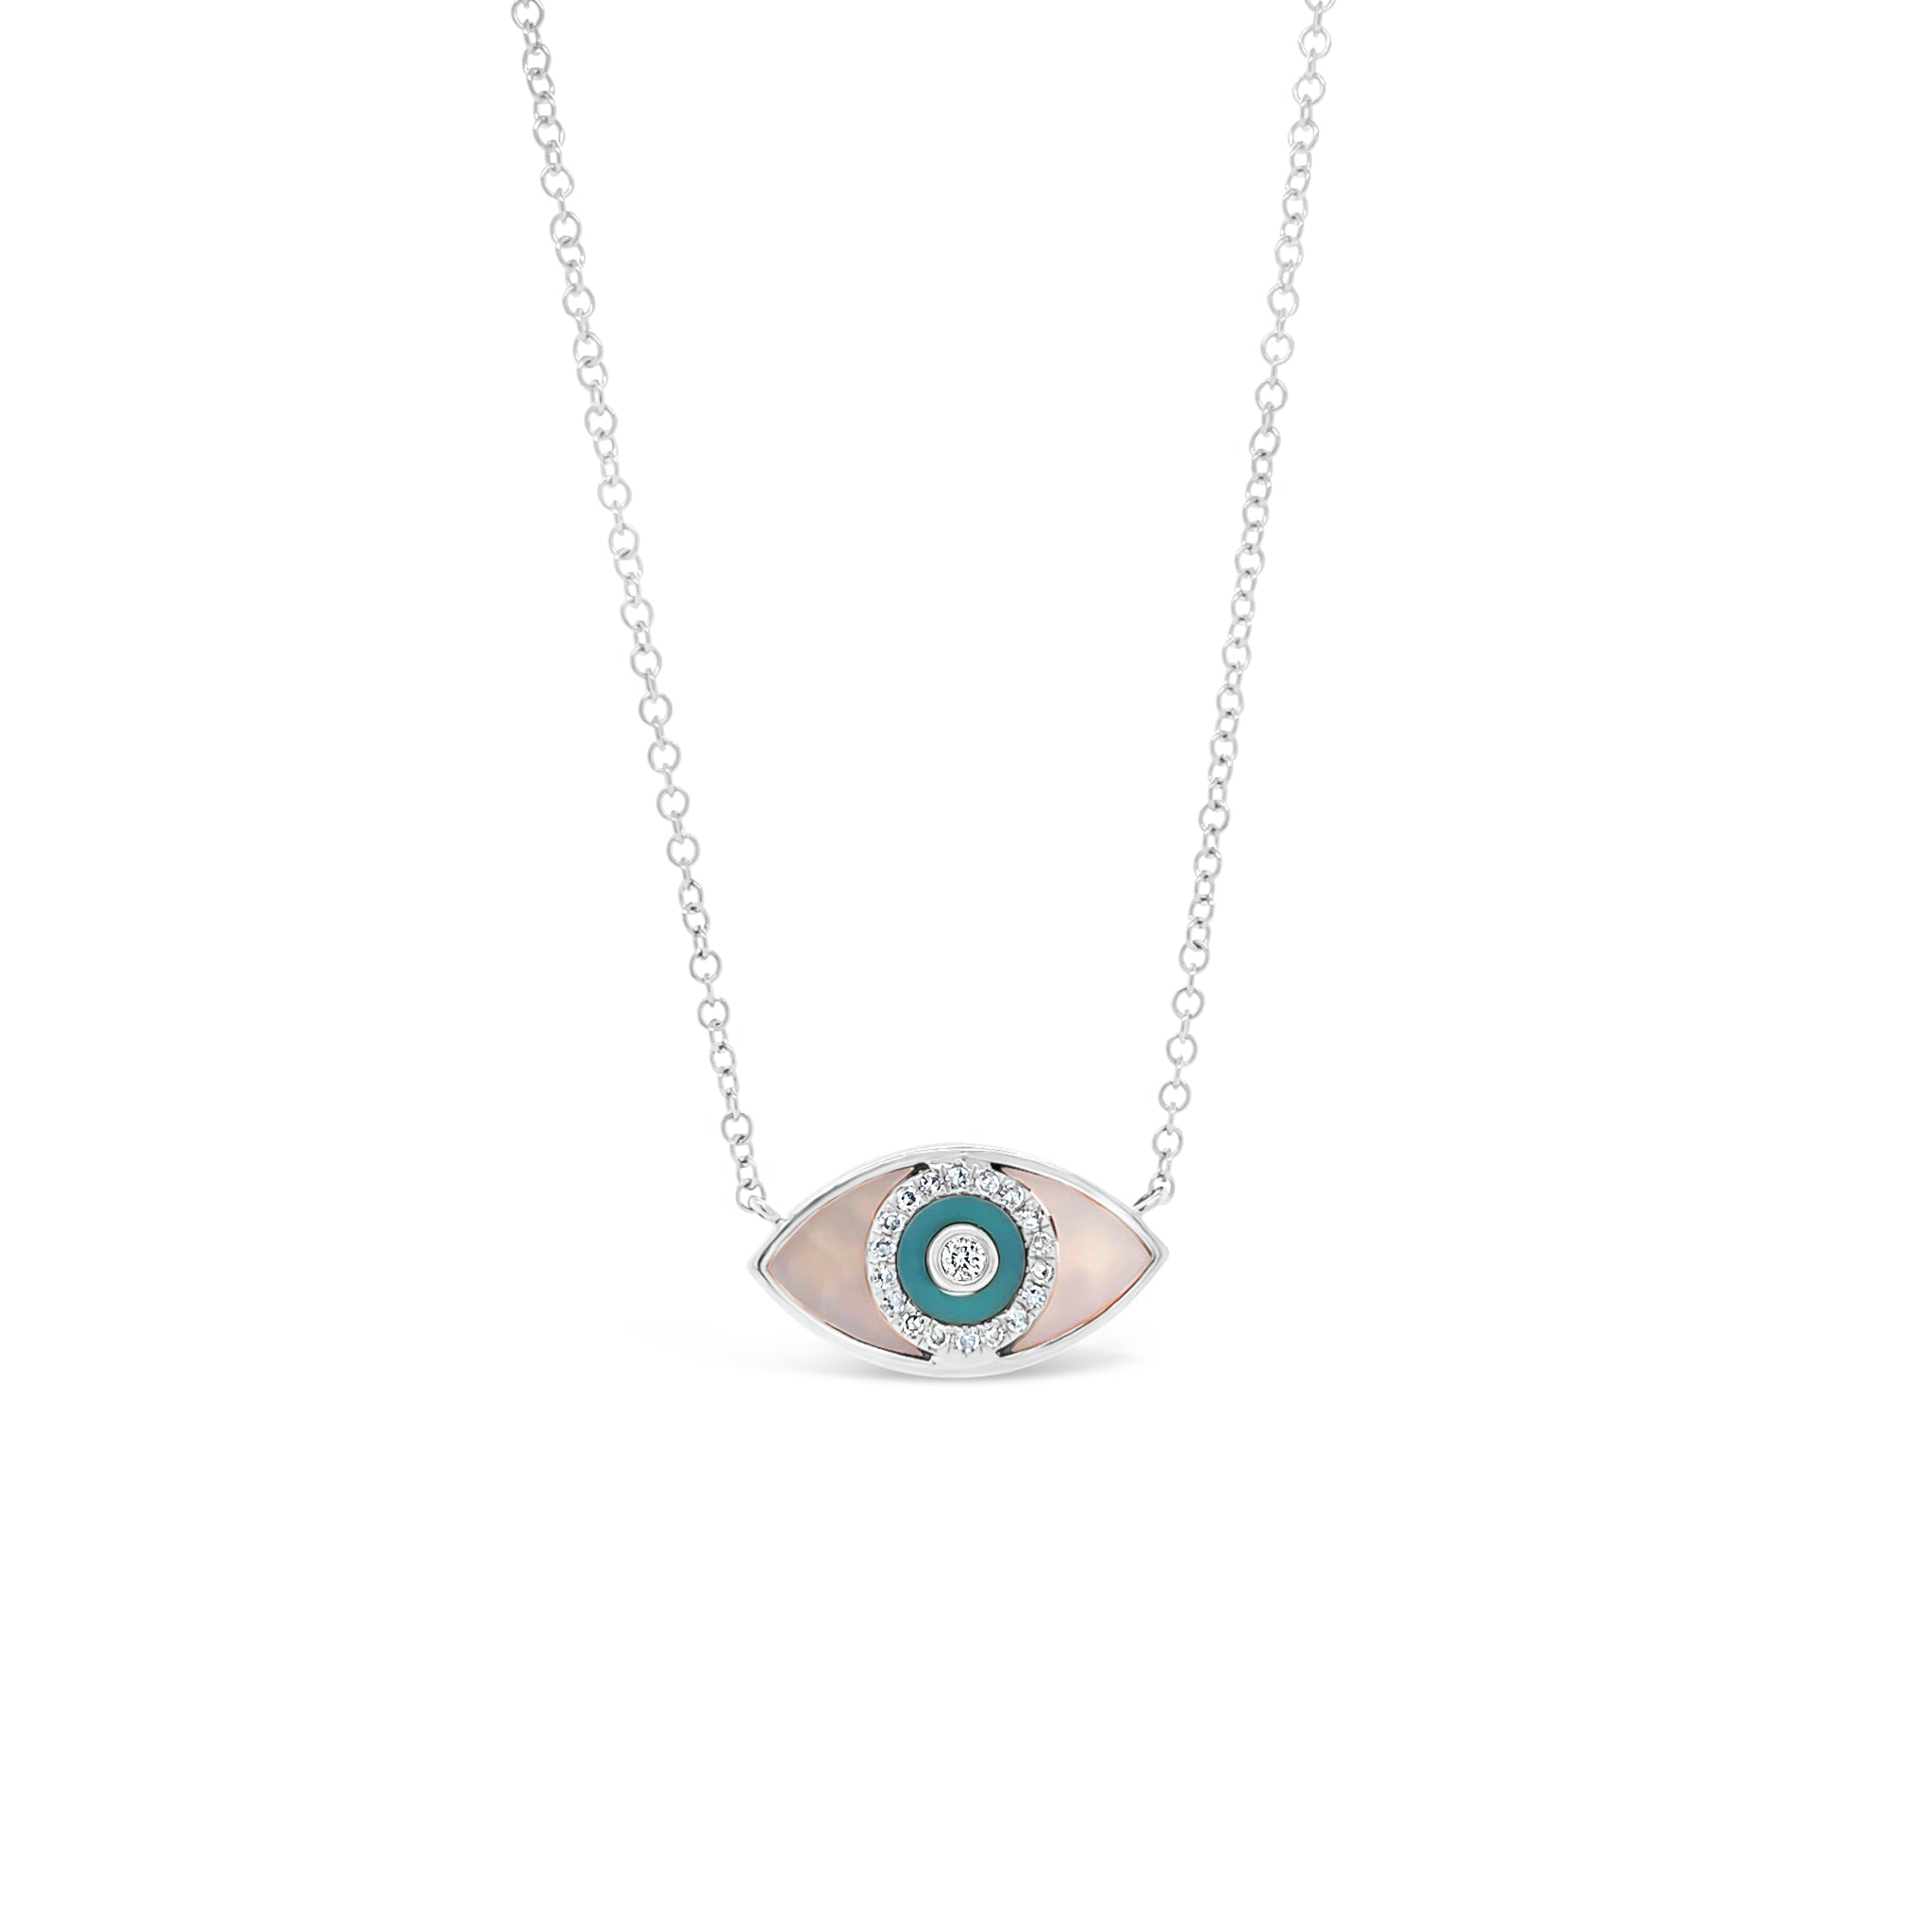 Clover Diamond Evil Eye Necklace – Ornaments and more